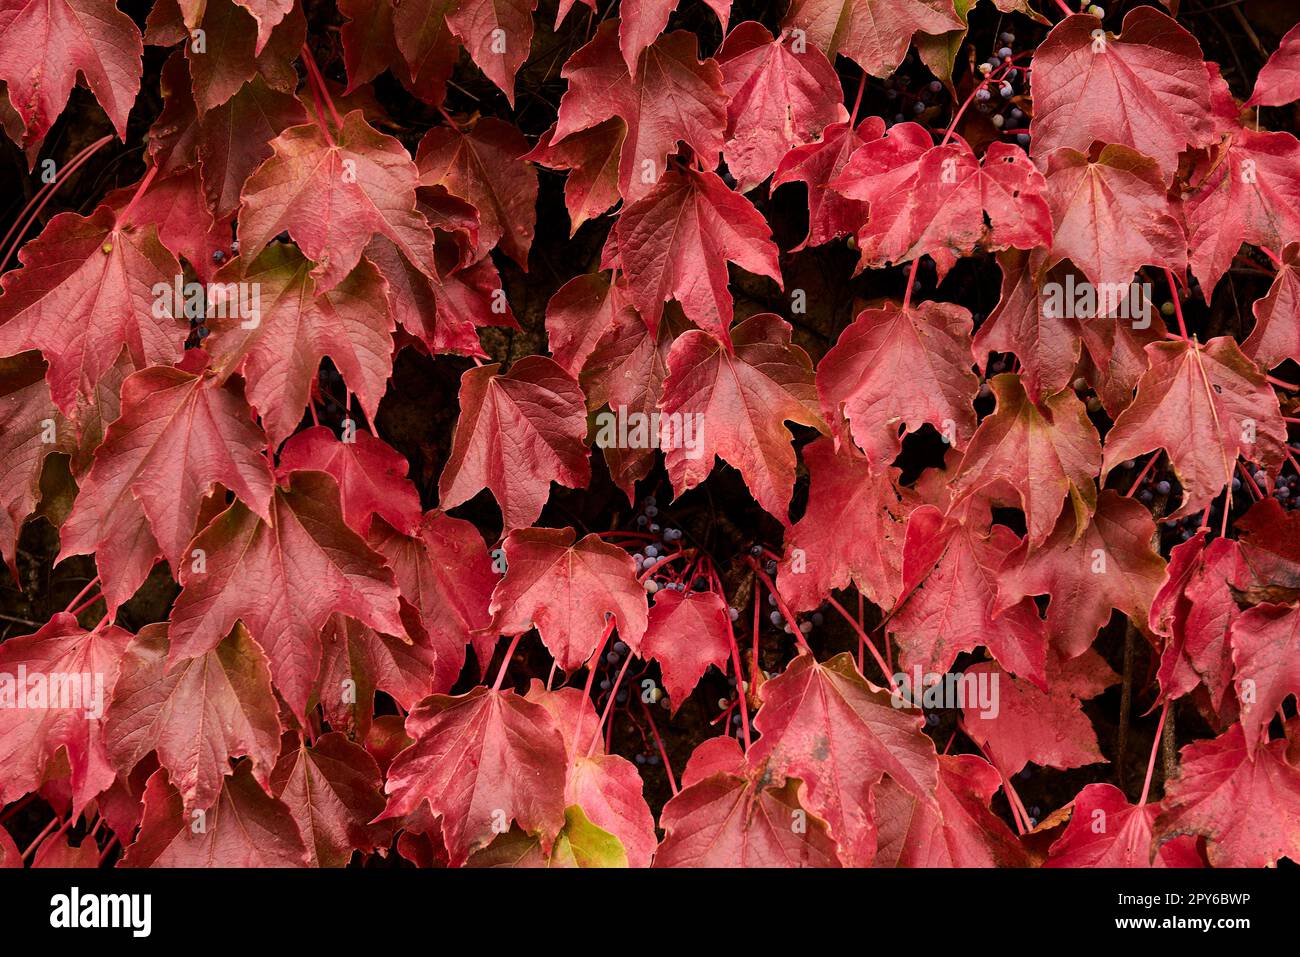 Cluster of ivy leaves and fruits in autumn Stock Photo